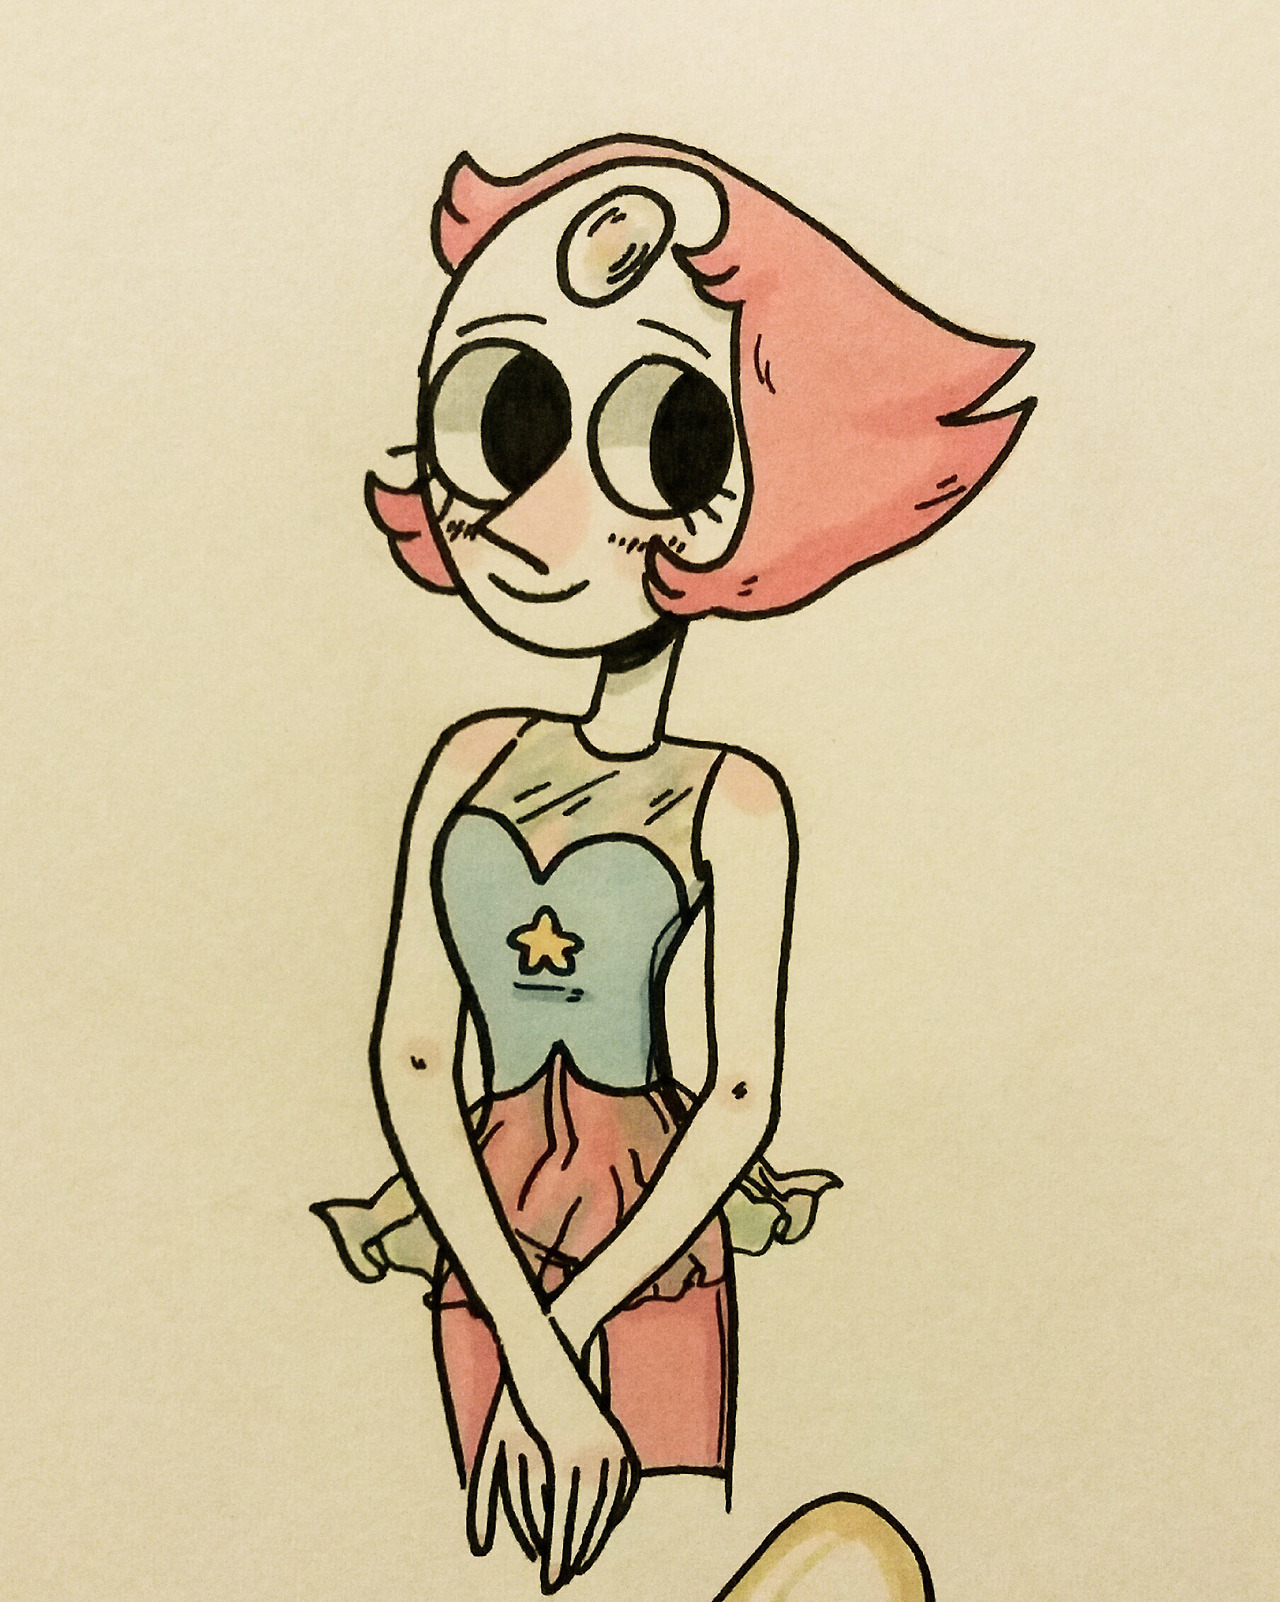 A quick pearl